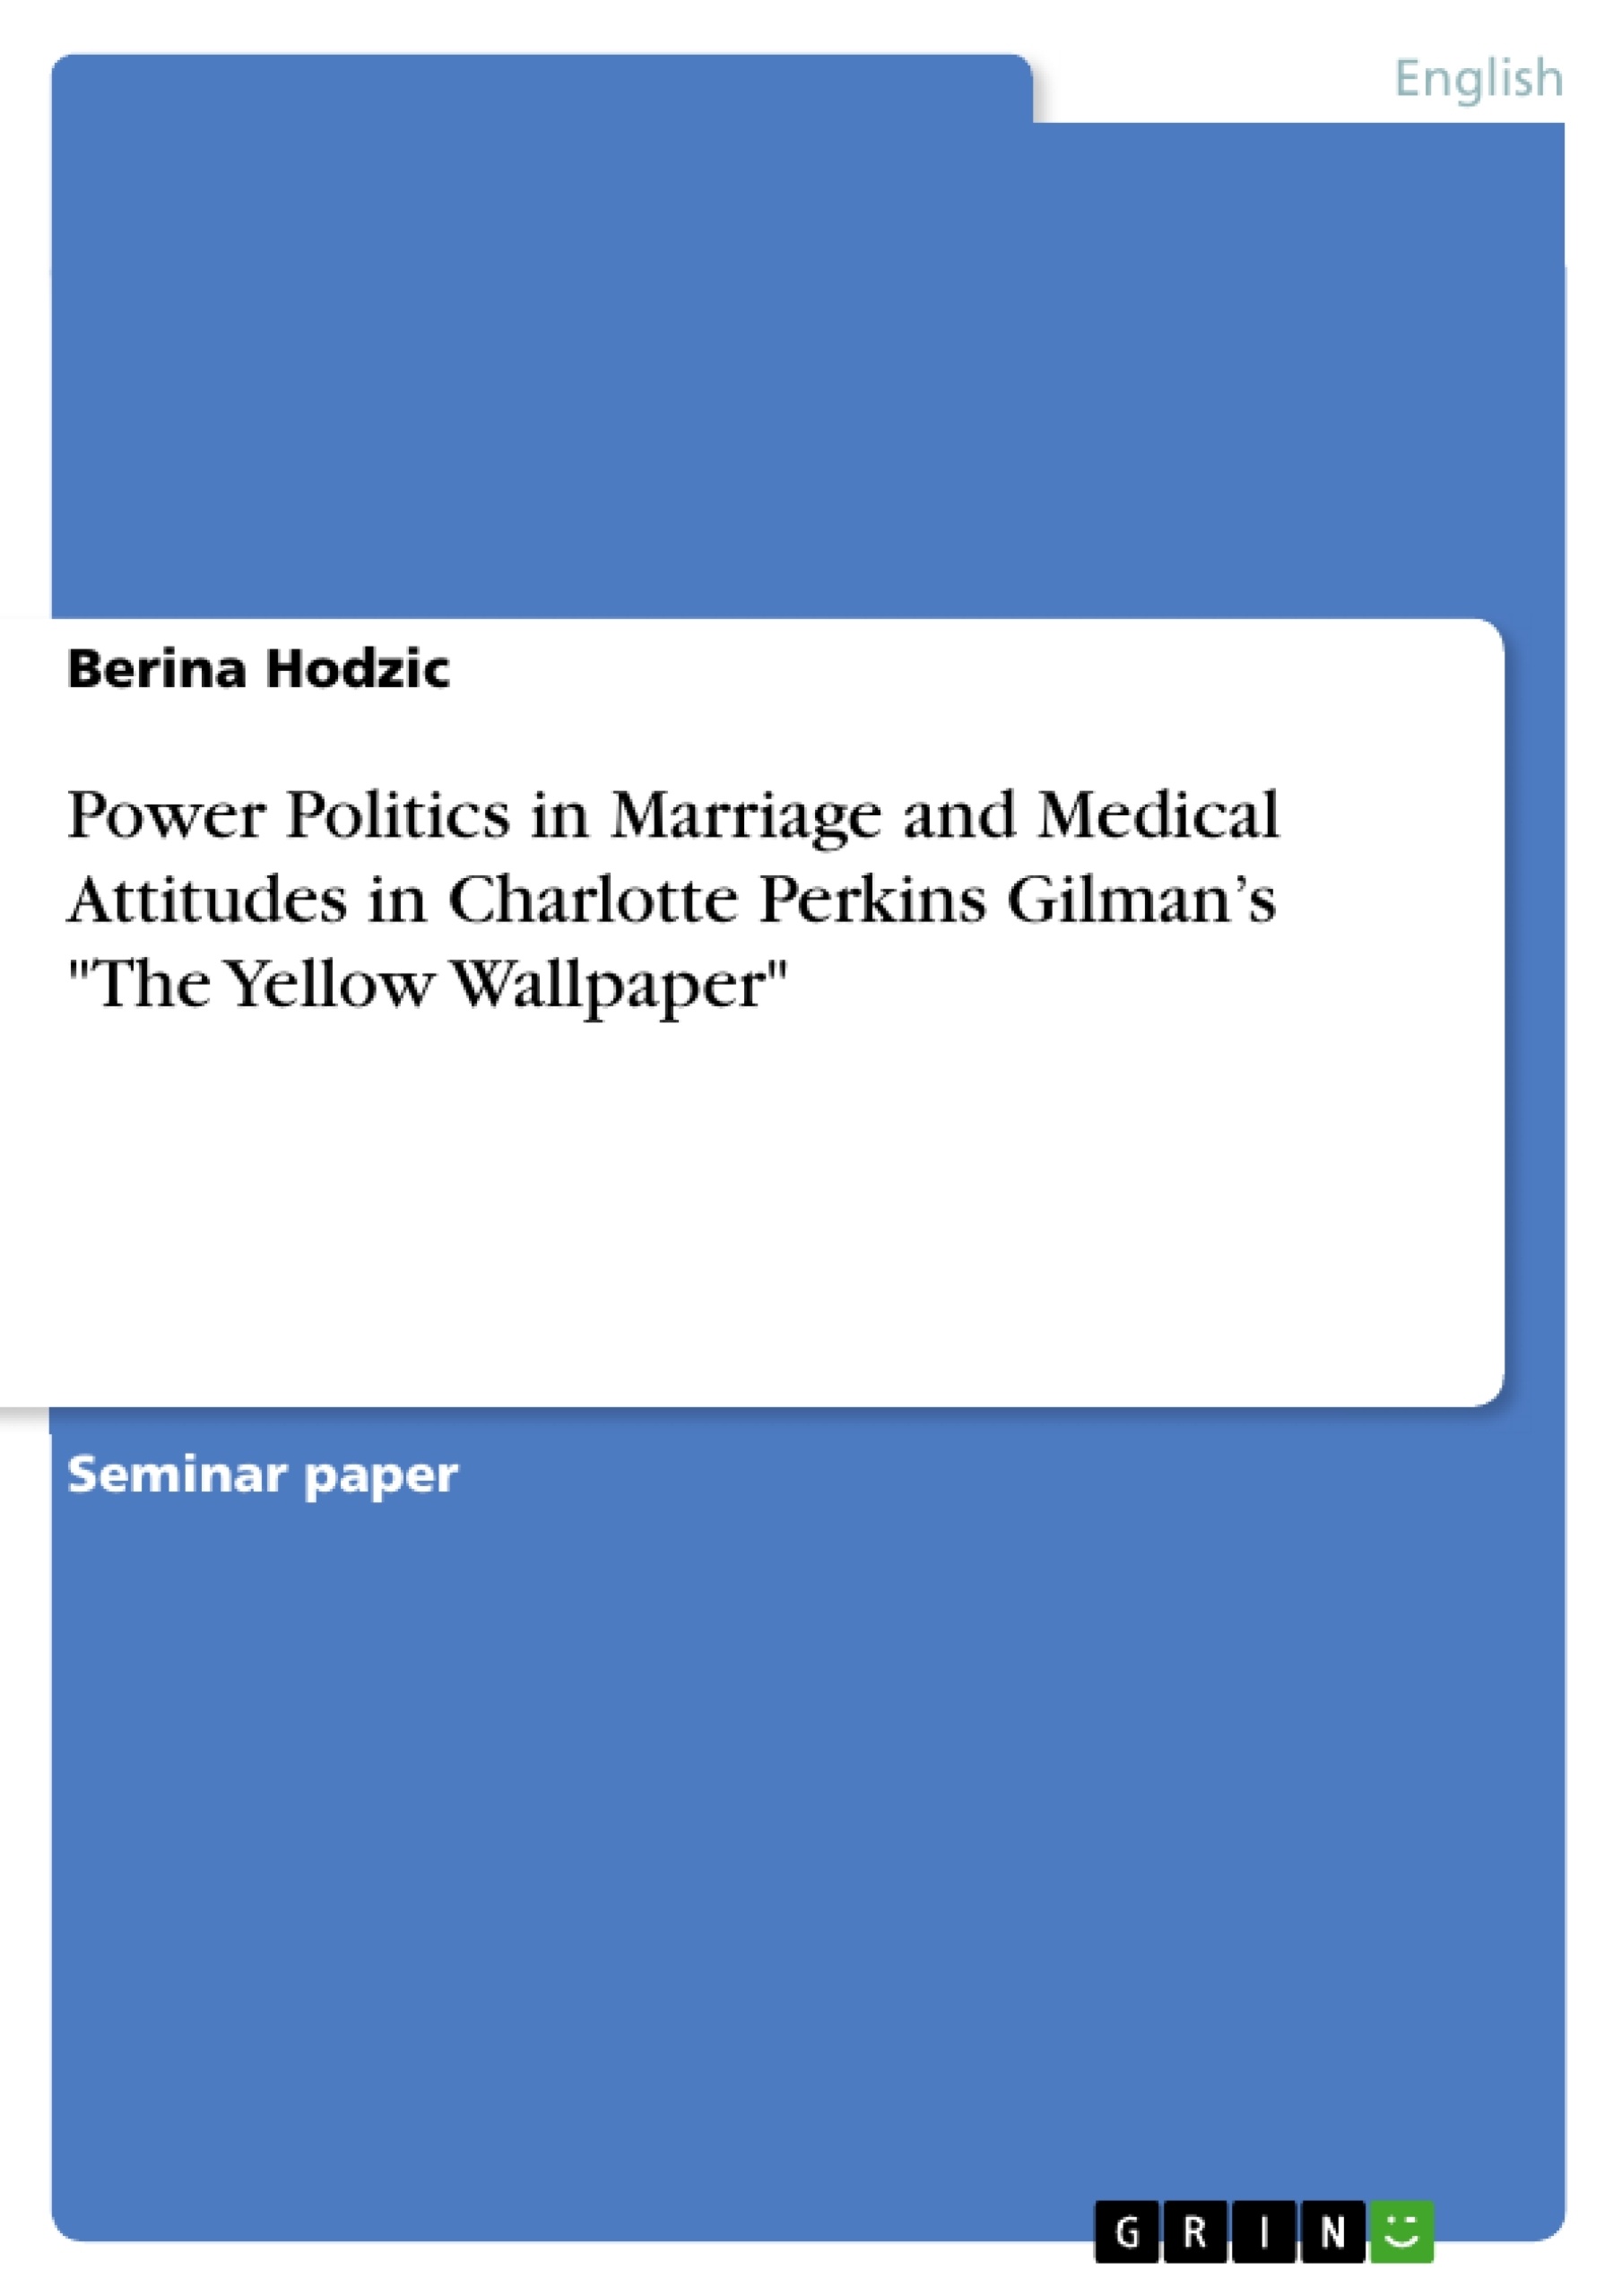 Título: Power Politics in Marriage and Medical Attitudes in Charlotte Perkins Gilman’s "The Yellow Wallpaper"